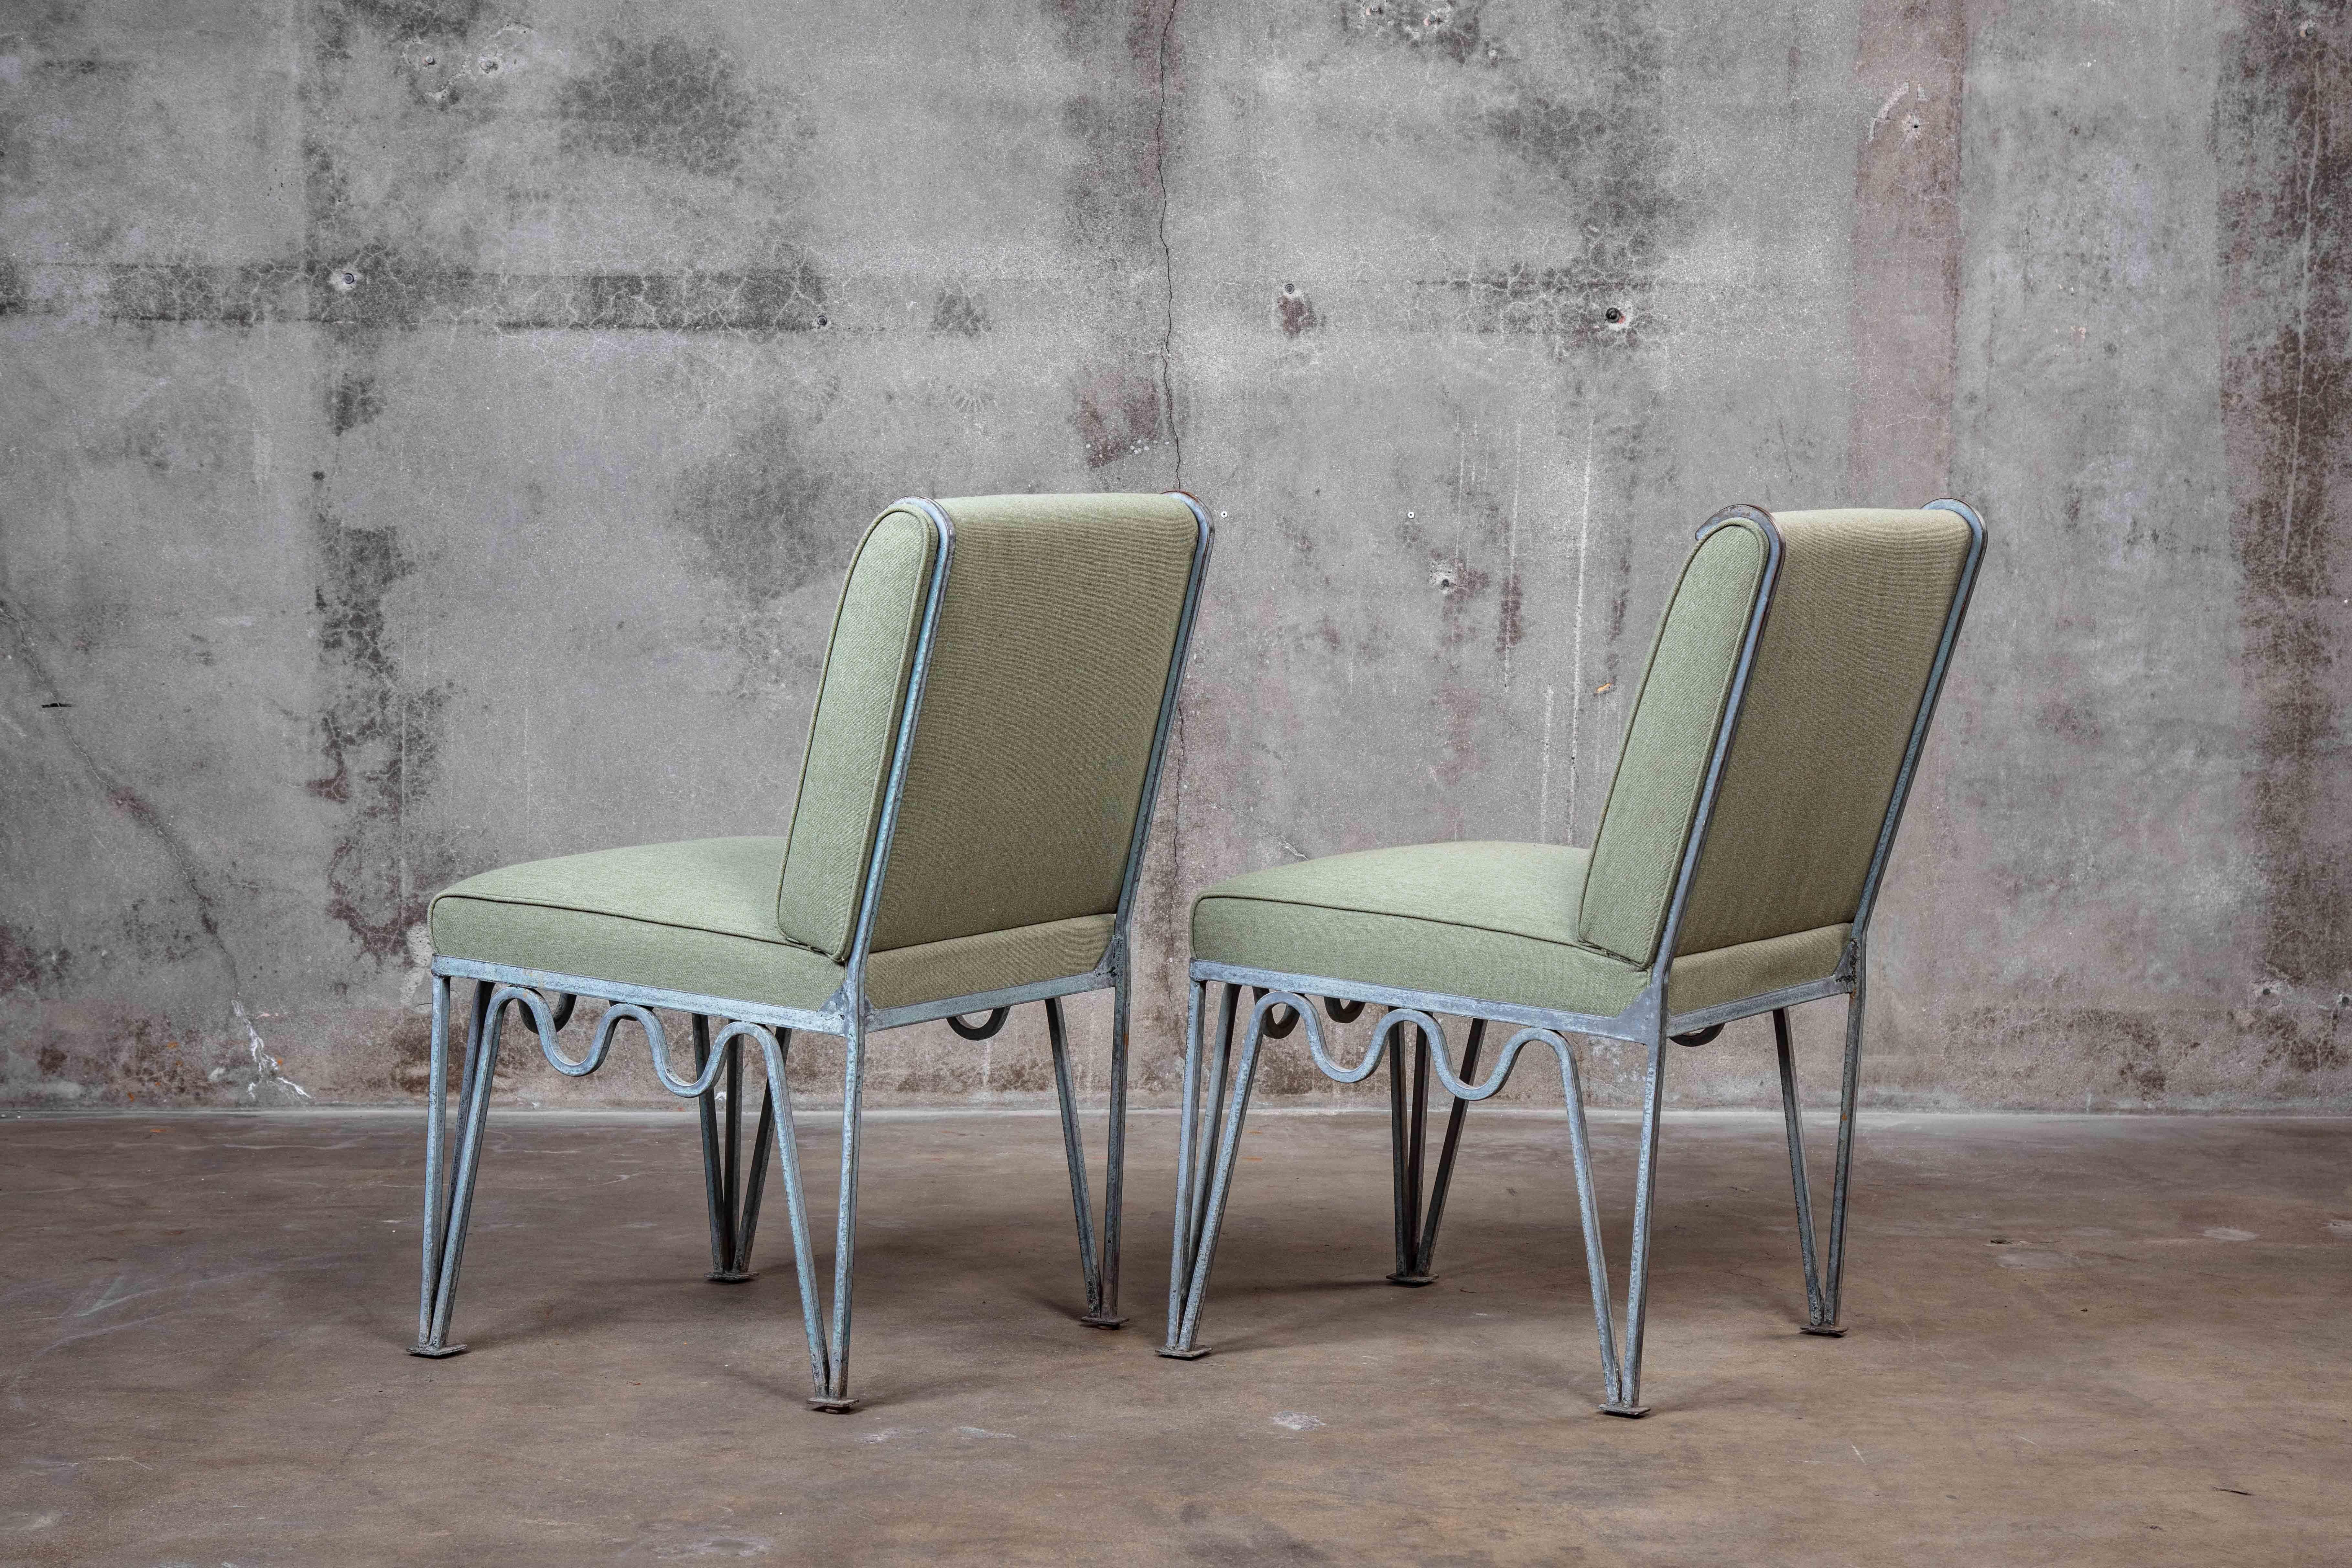 Pair of Pacific Iron side chairs in bronze, 1940s

Measures: Seat: 18